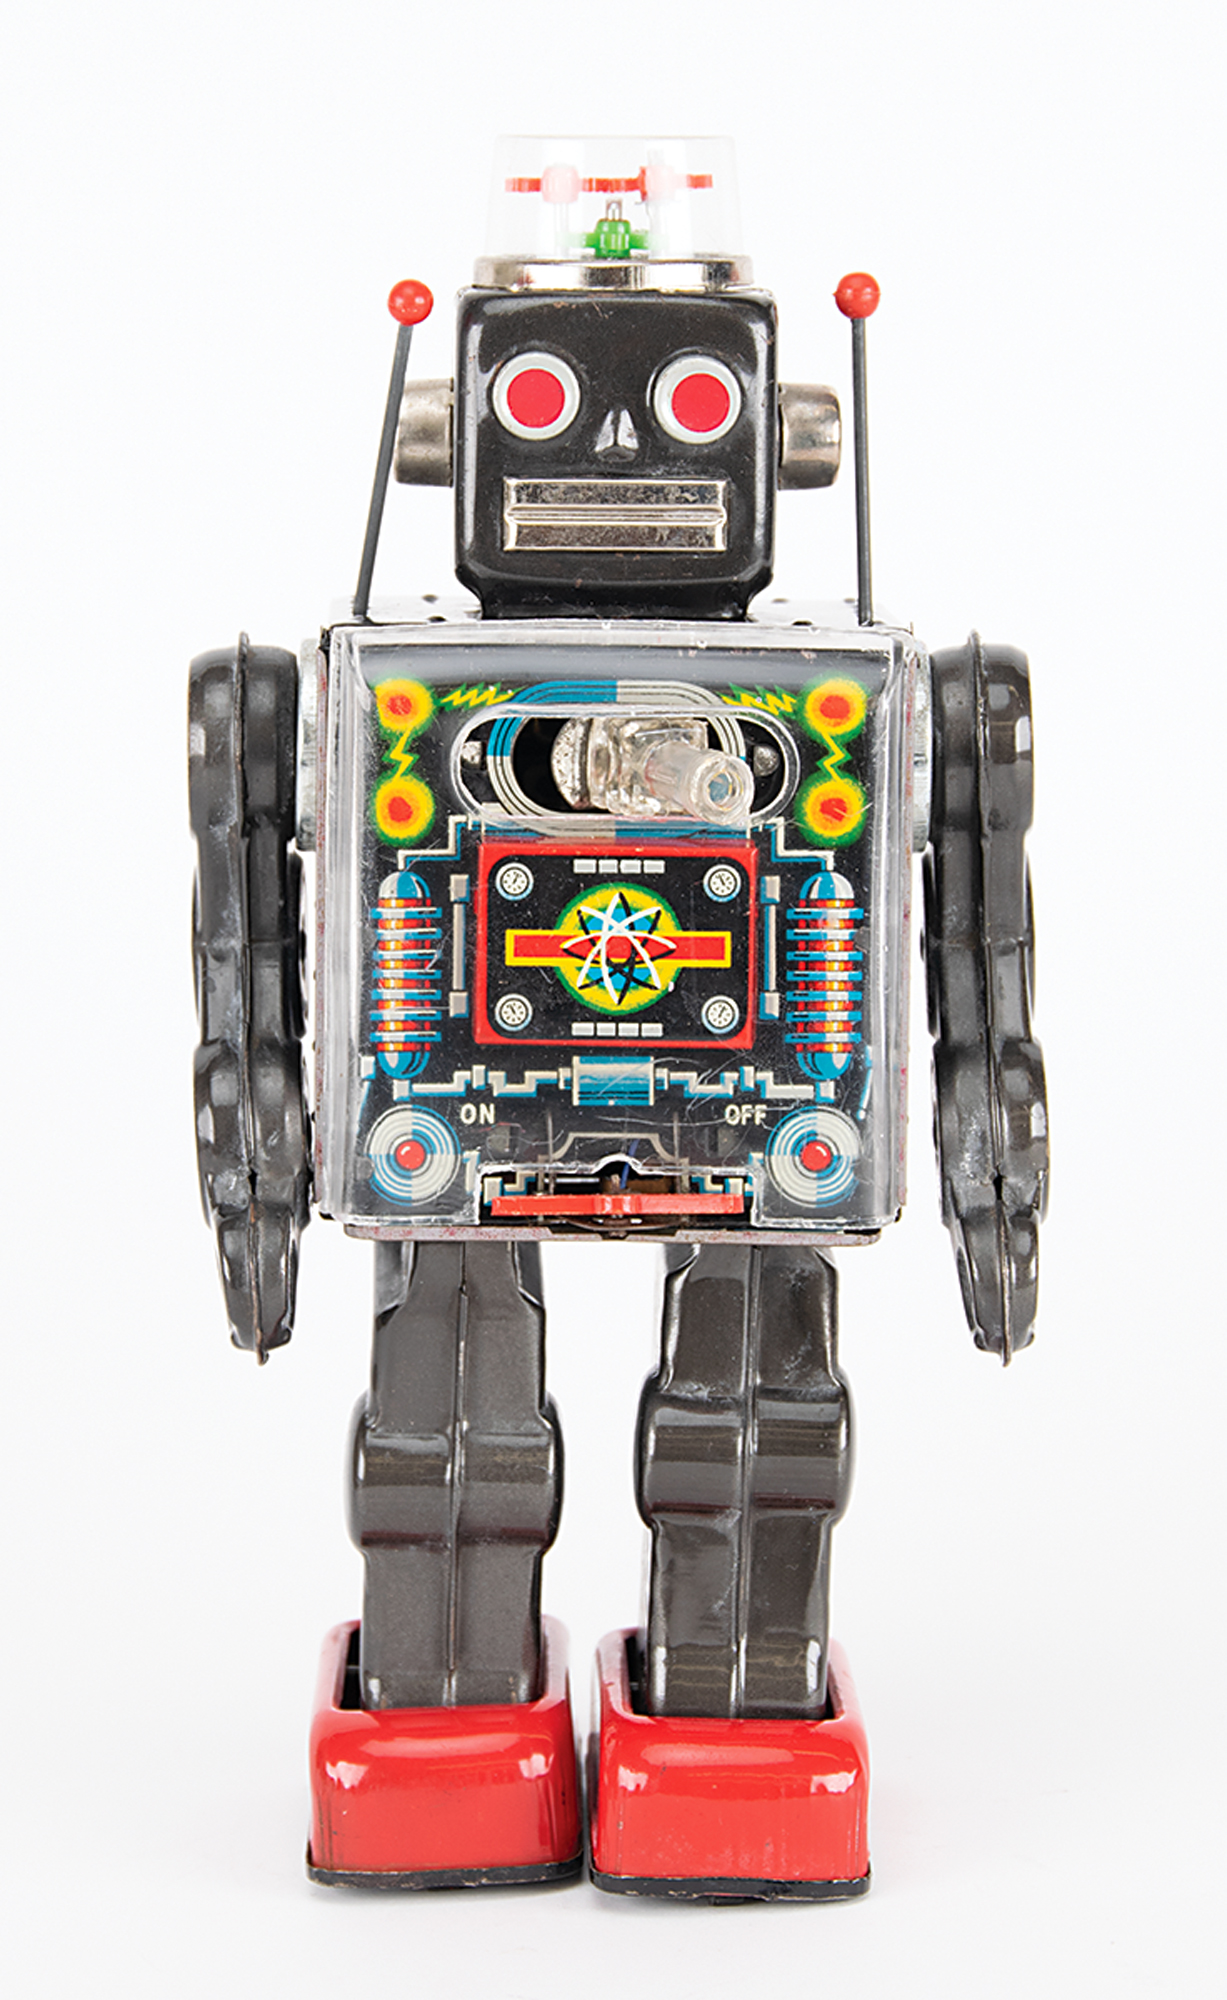 Lot #202 Vintage Fighting Robot (1965, First Version) by Horikawa from the collection of Andres Serrano